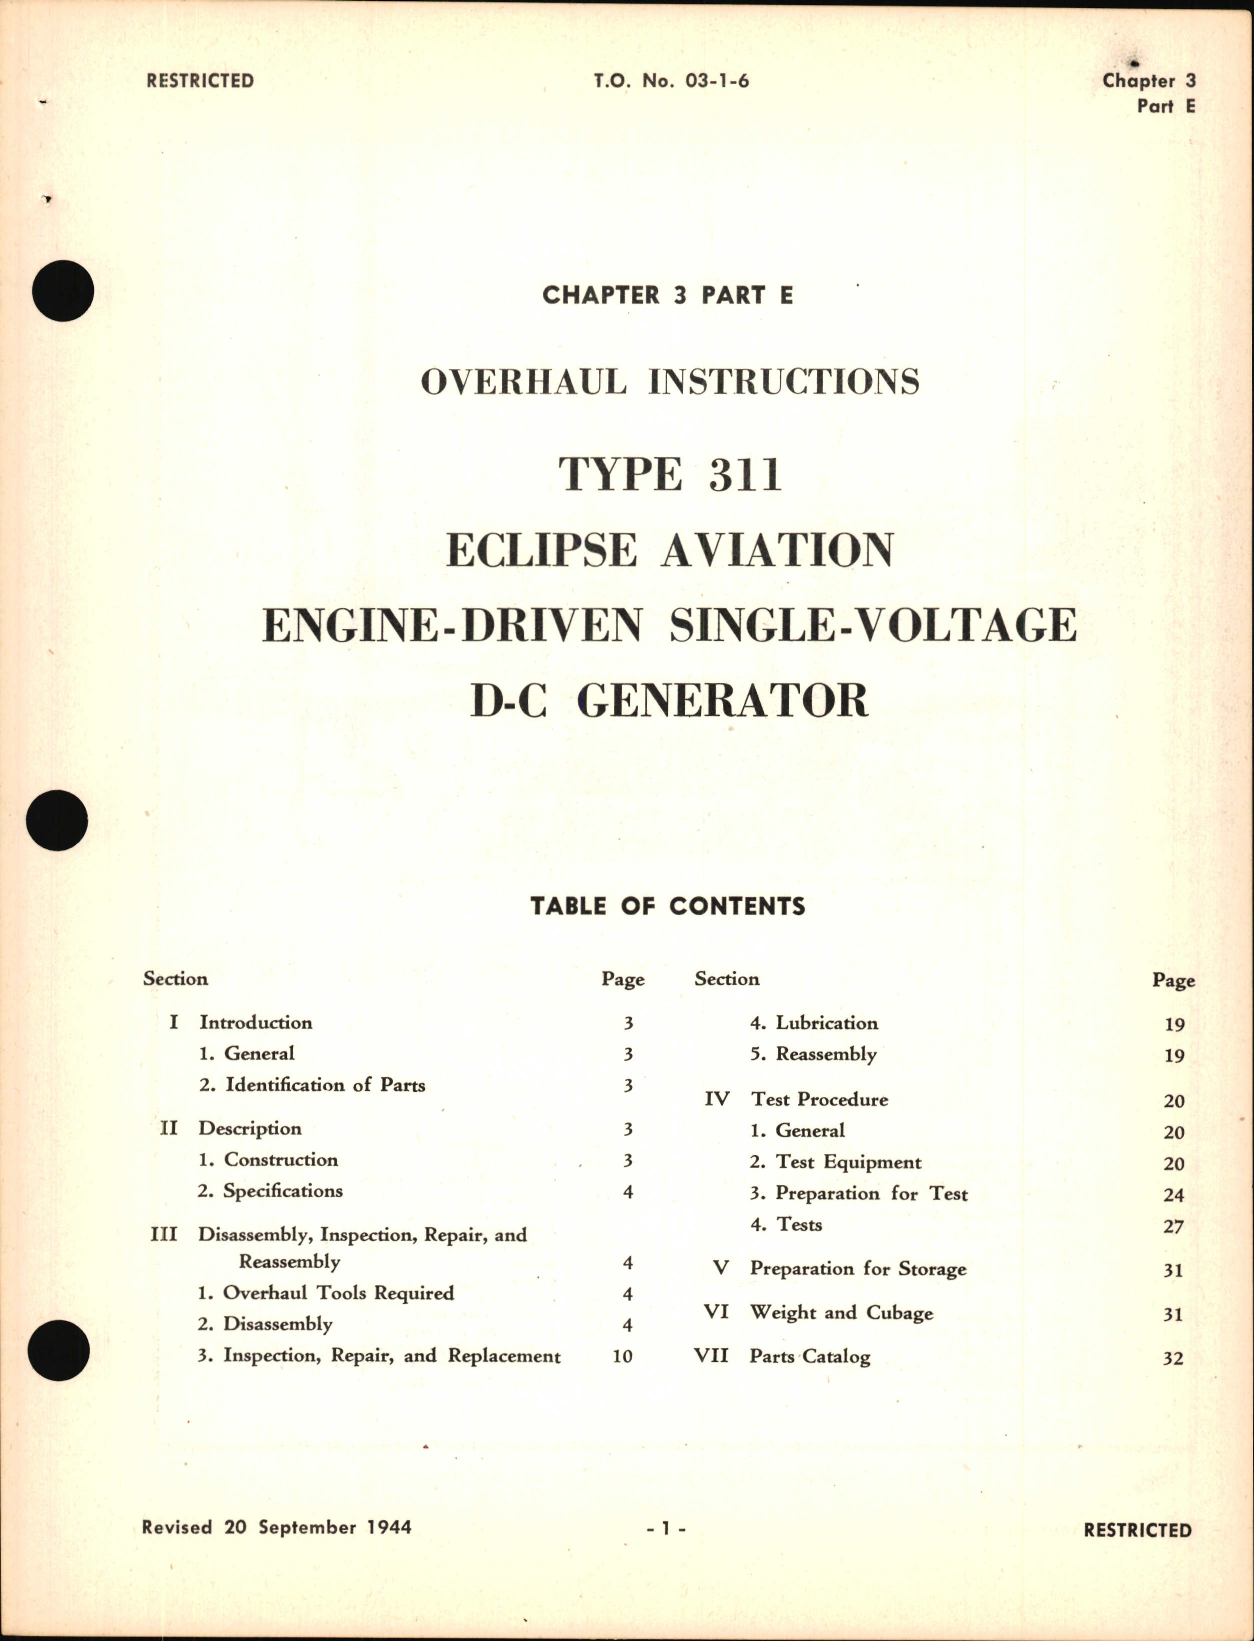 Sample page 1 from AirCorps Library document: Overhaul Instructions for Engine Driven Single Voltage D-C Generator, Type 311